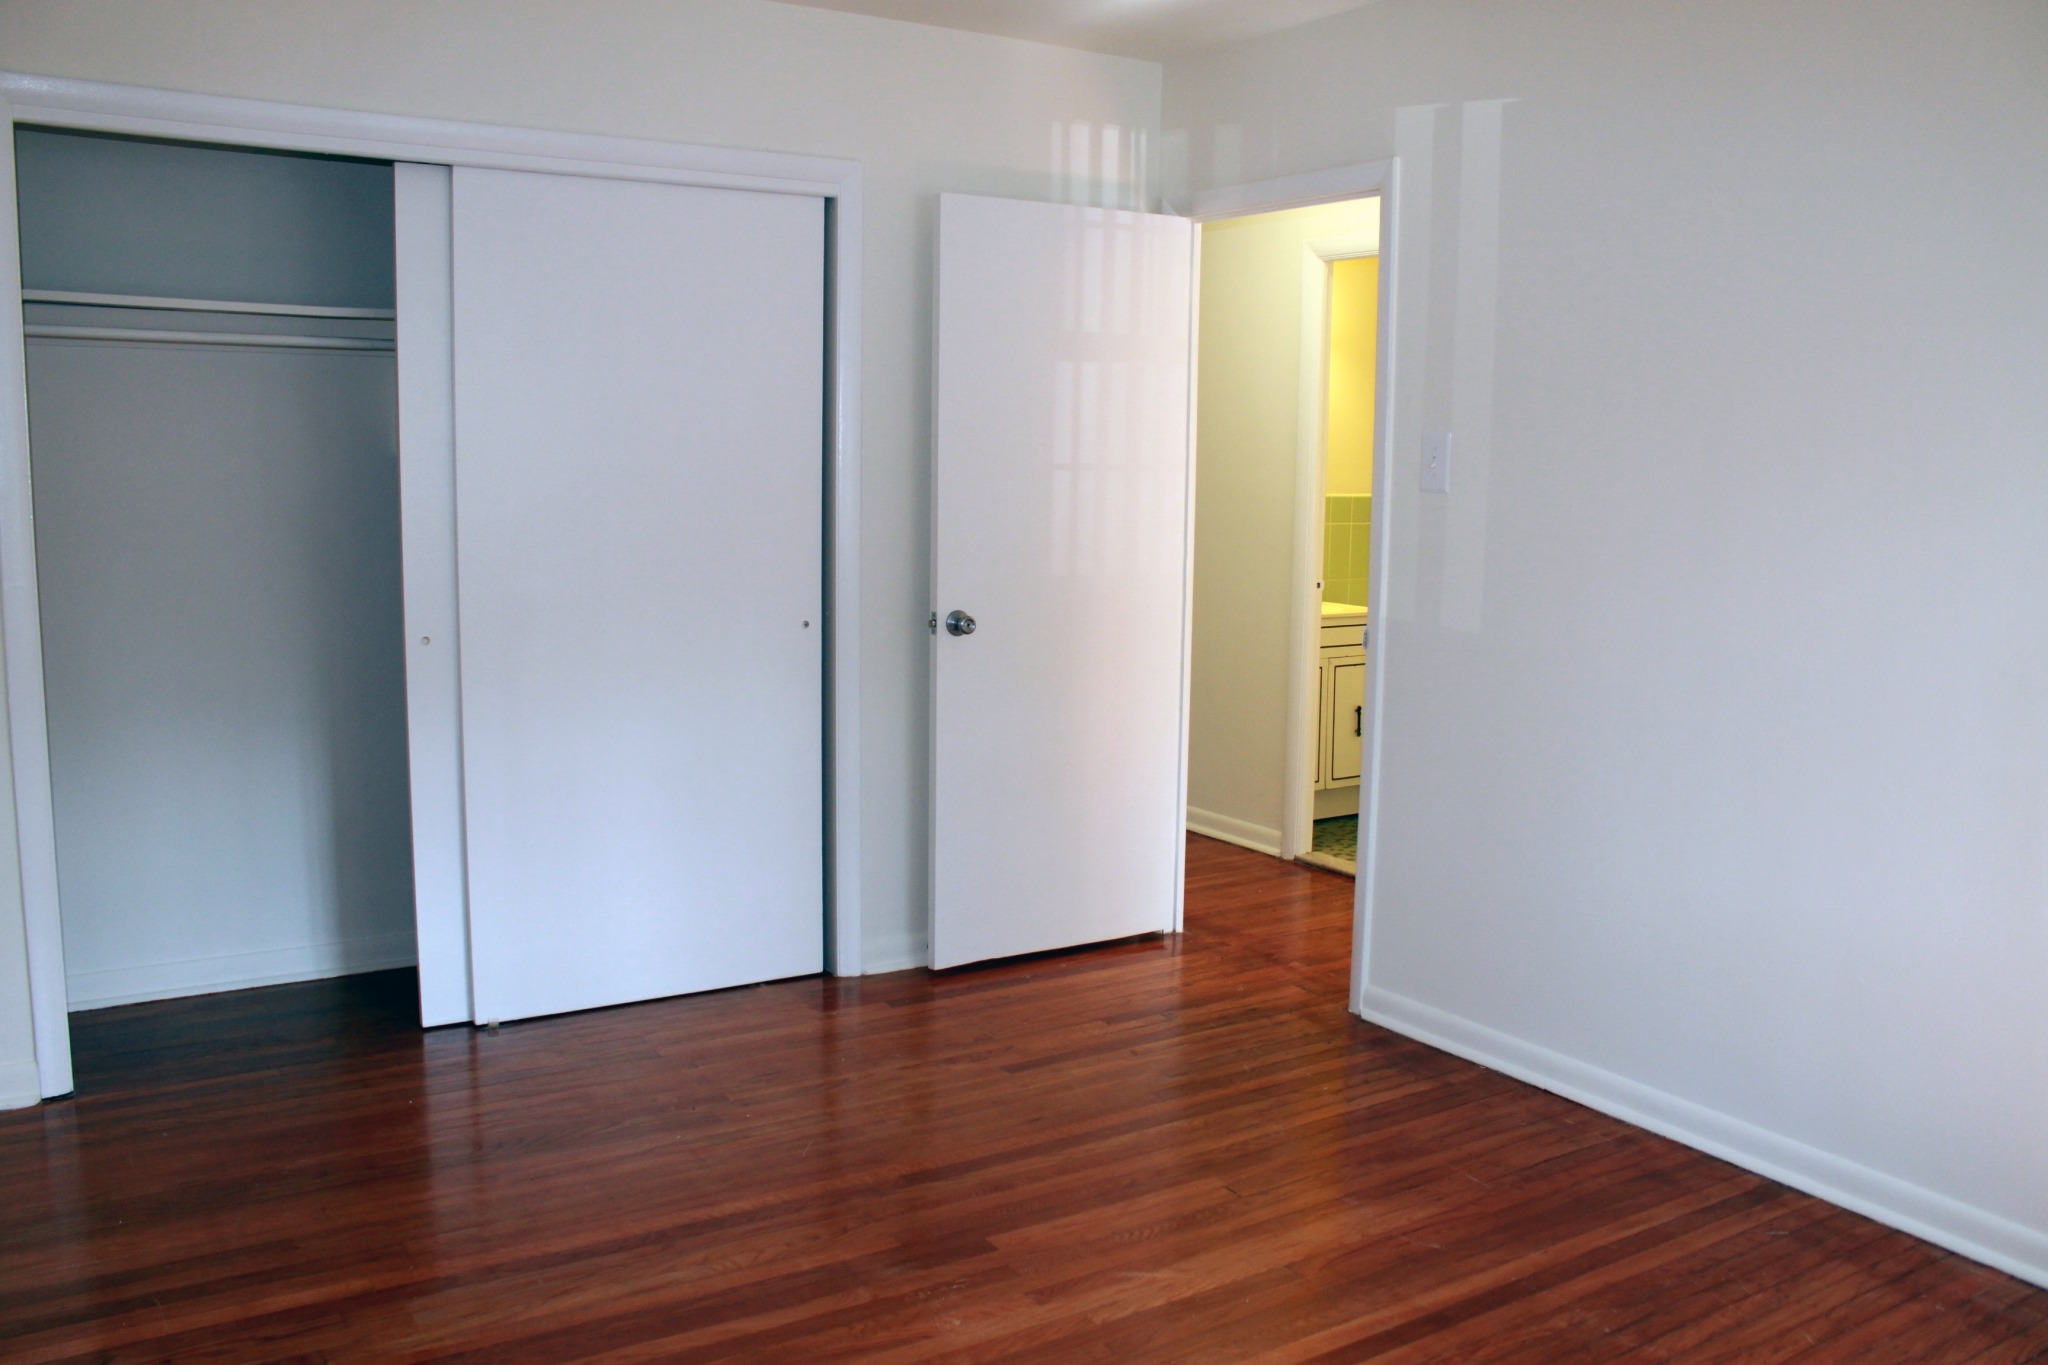 Spacious bedroom with wooden floors and a closet with sliding doors.